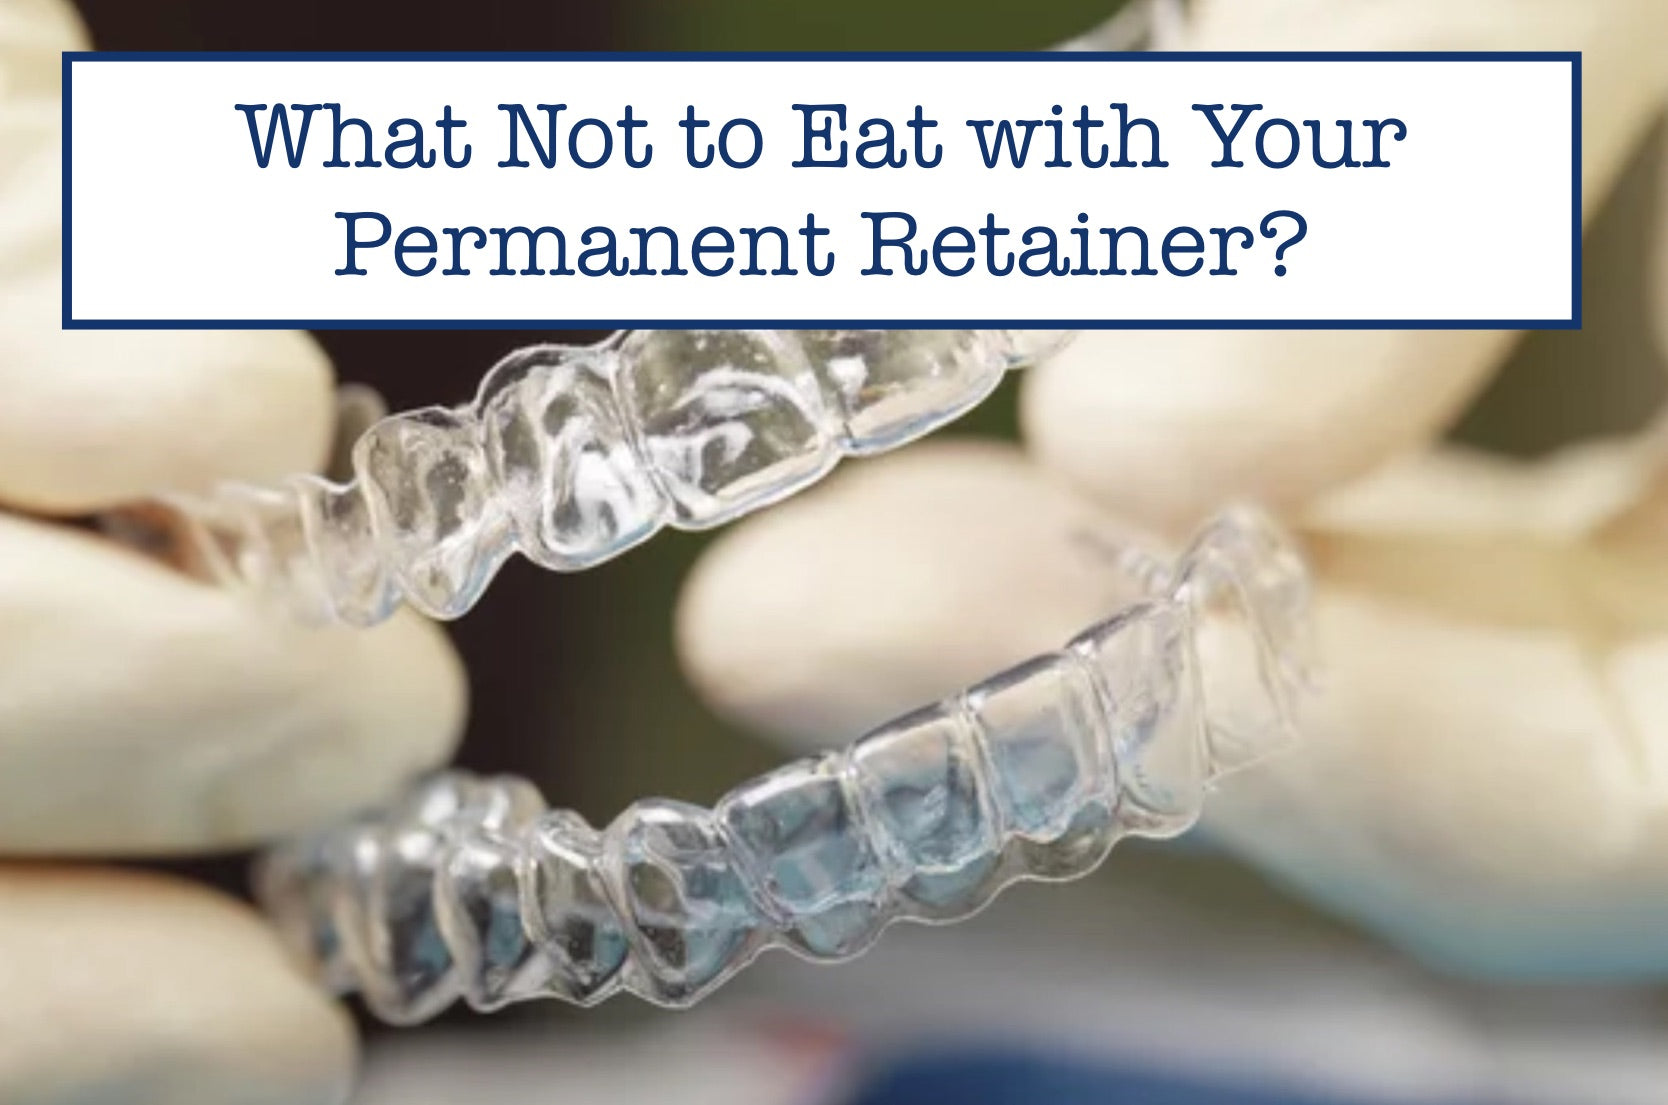 Permanent Retainer Food Fails: What Not to Eat When You Have a Permanent Retainer